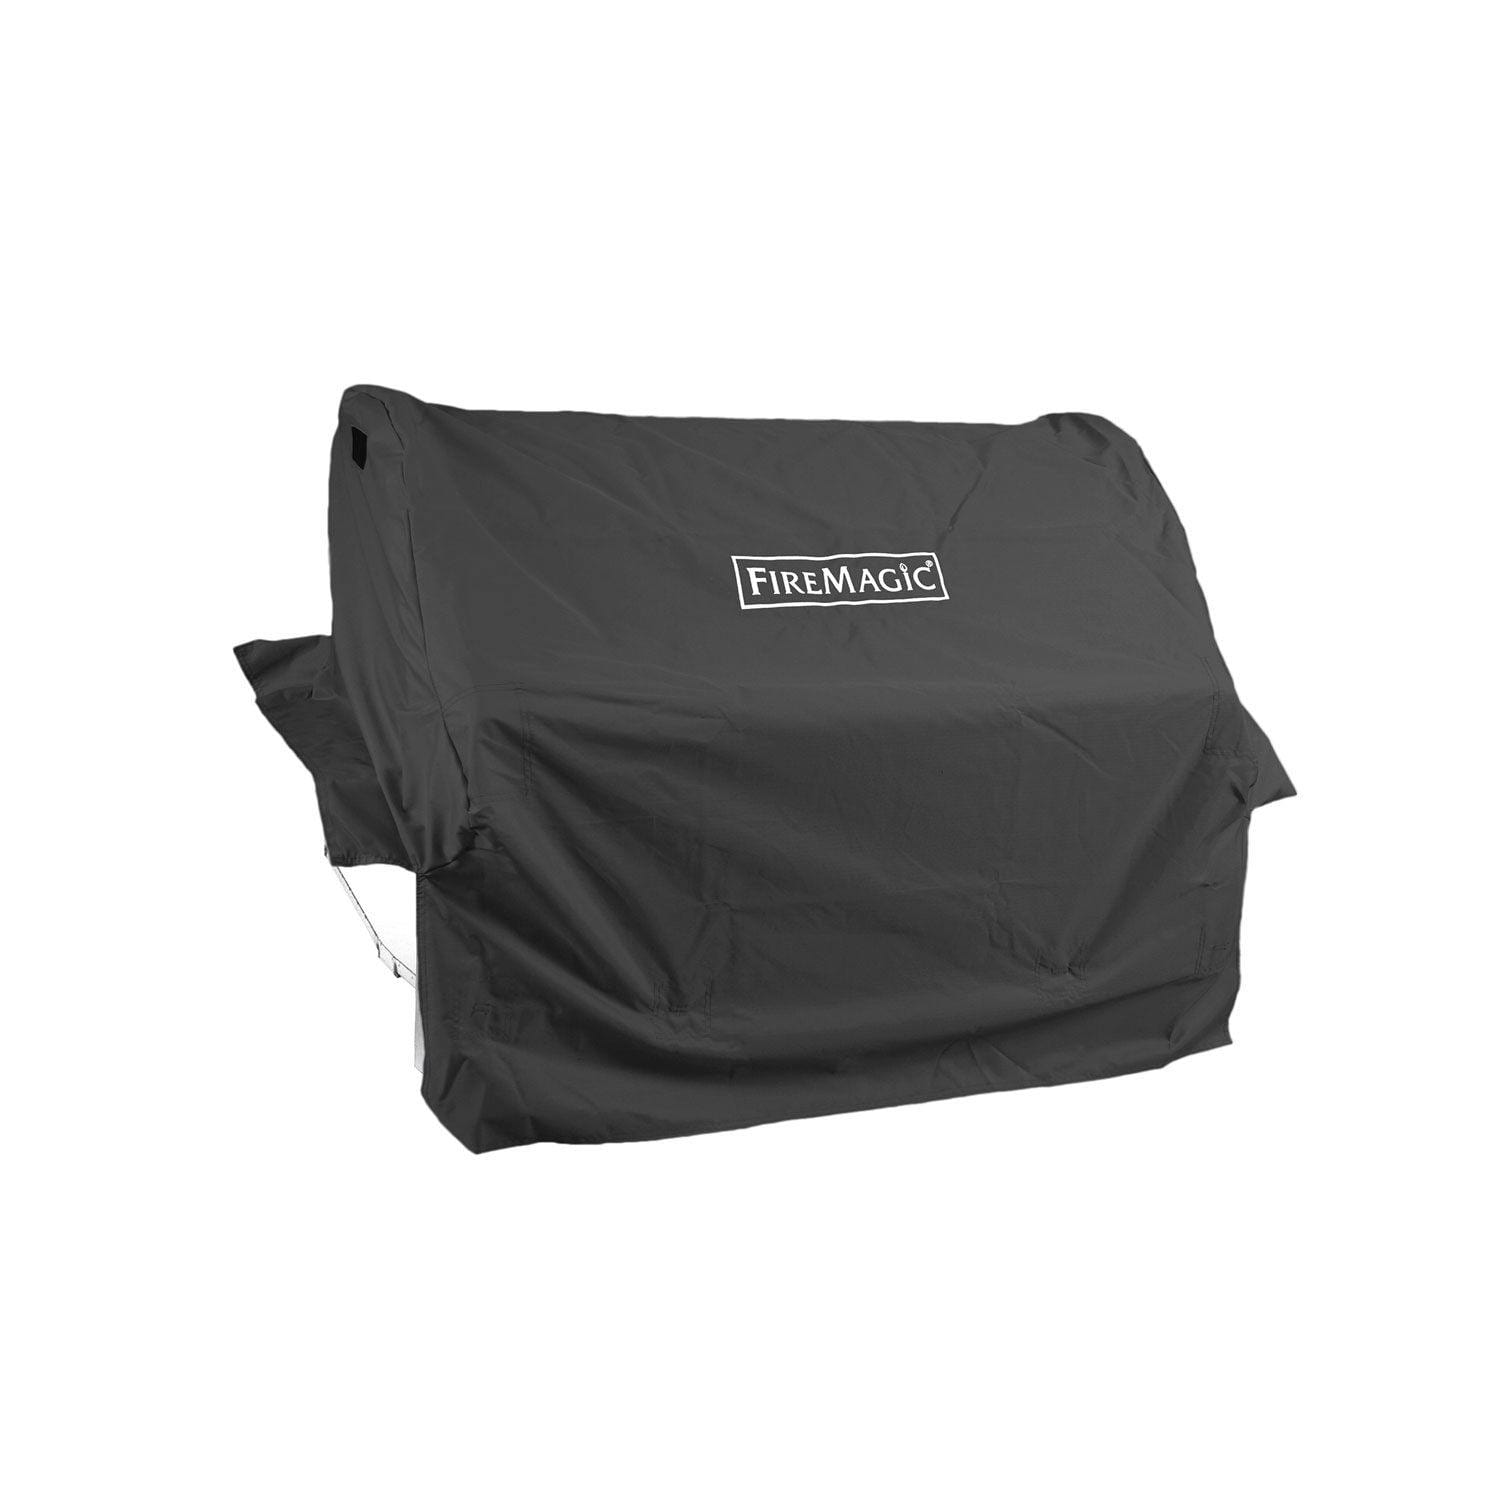 Fire Magic Grill Cover C650i Built-In Grill Cover